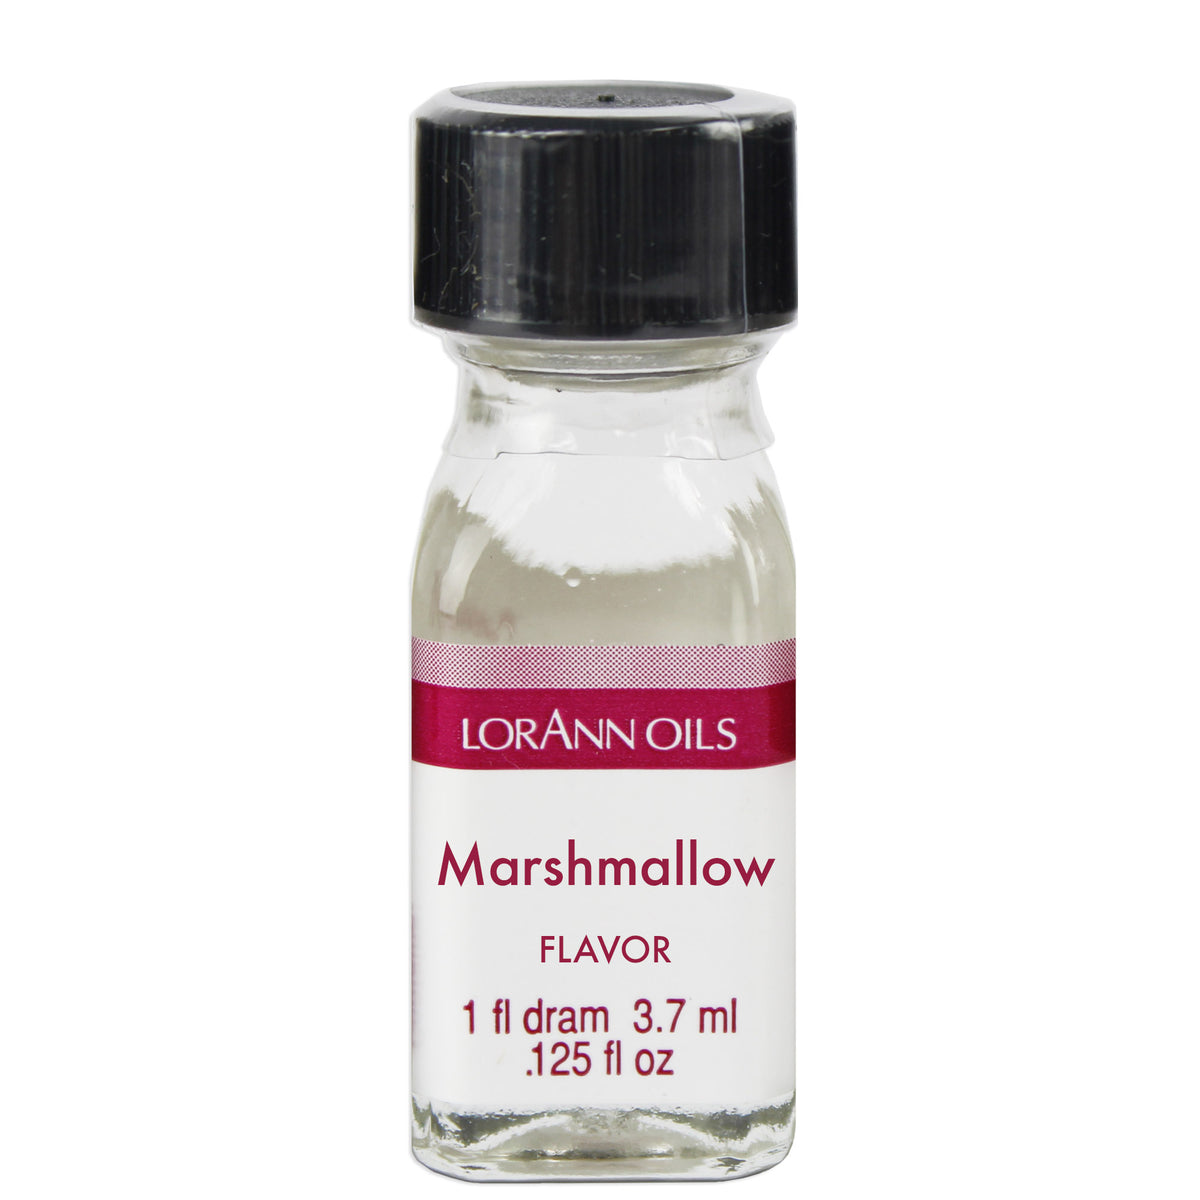 Marshmallow Flavoring Oil